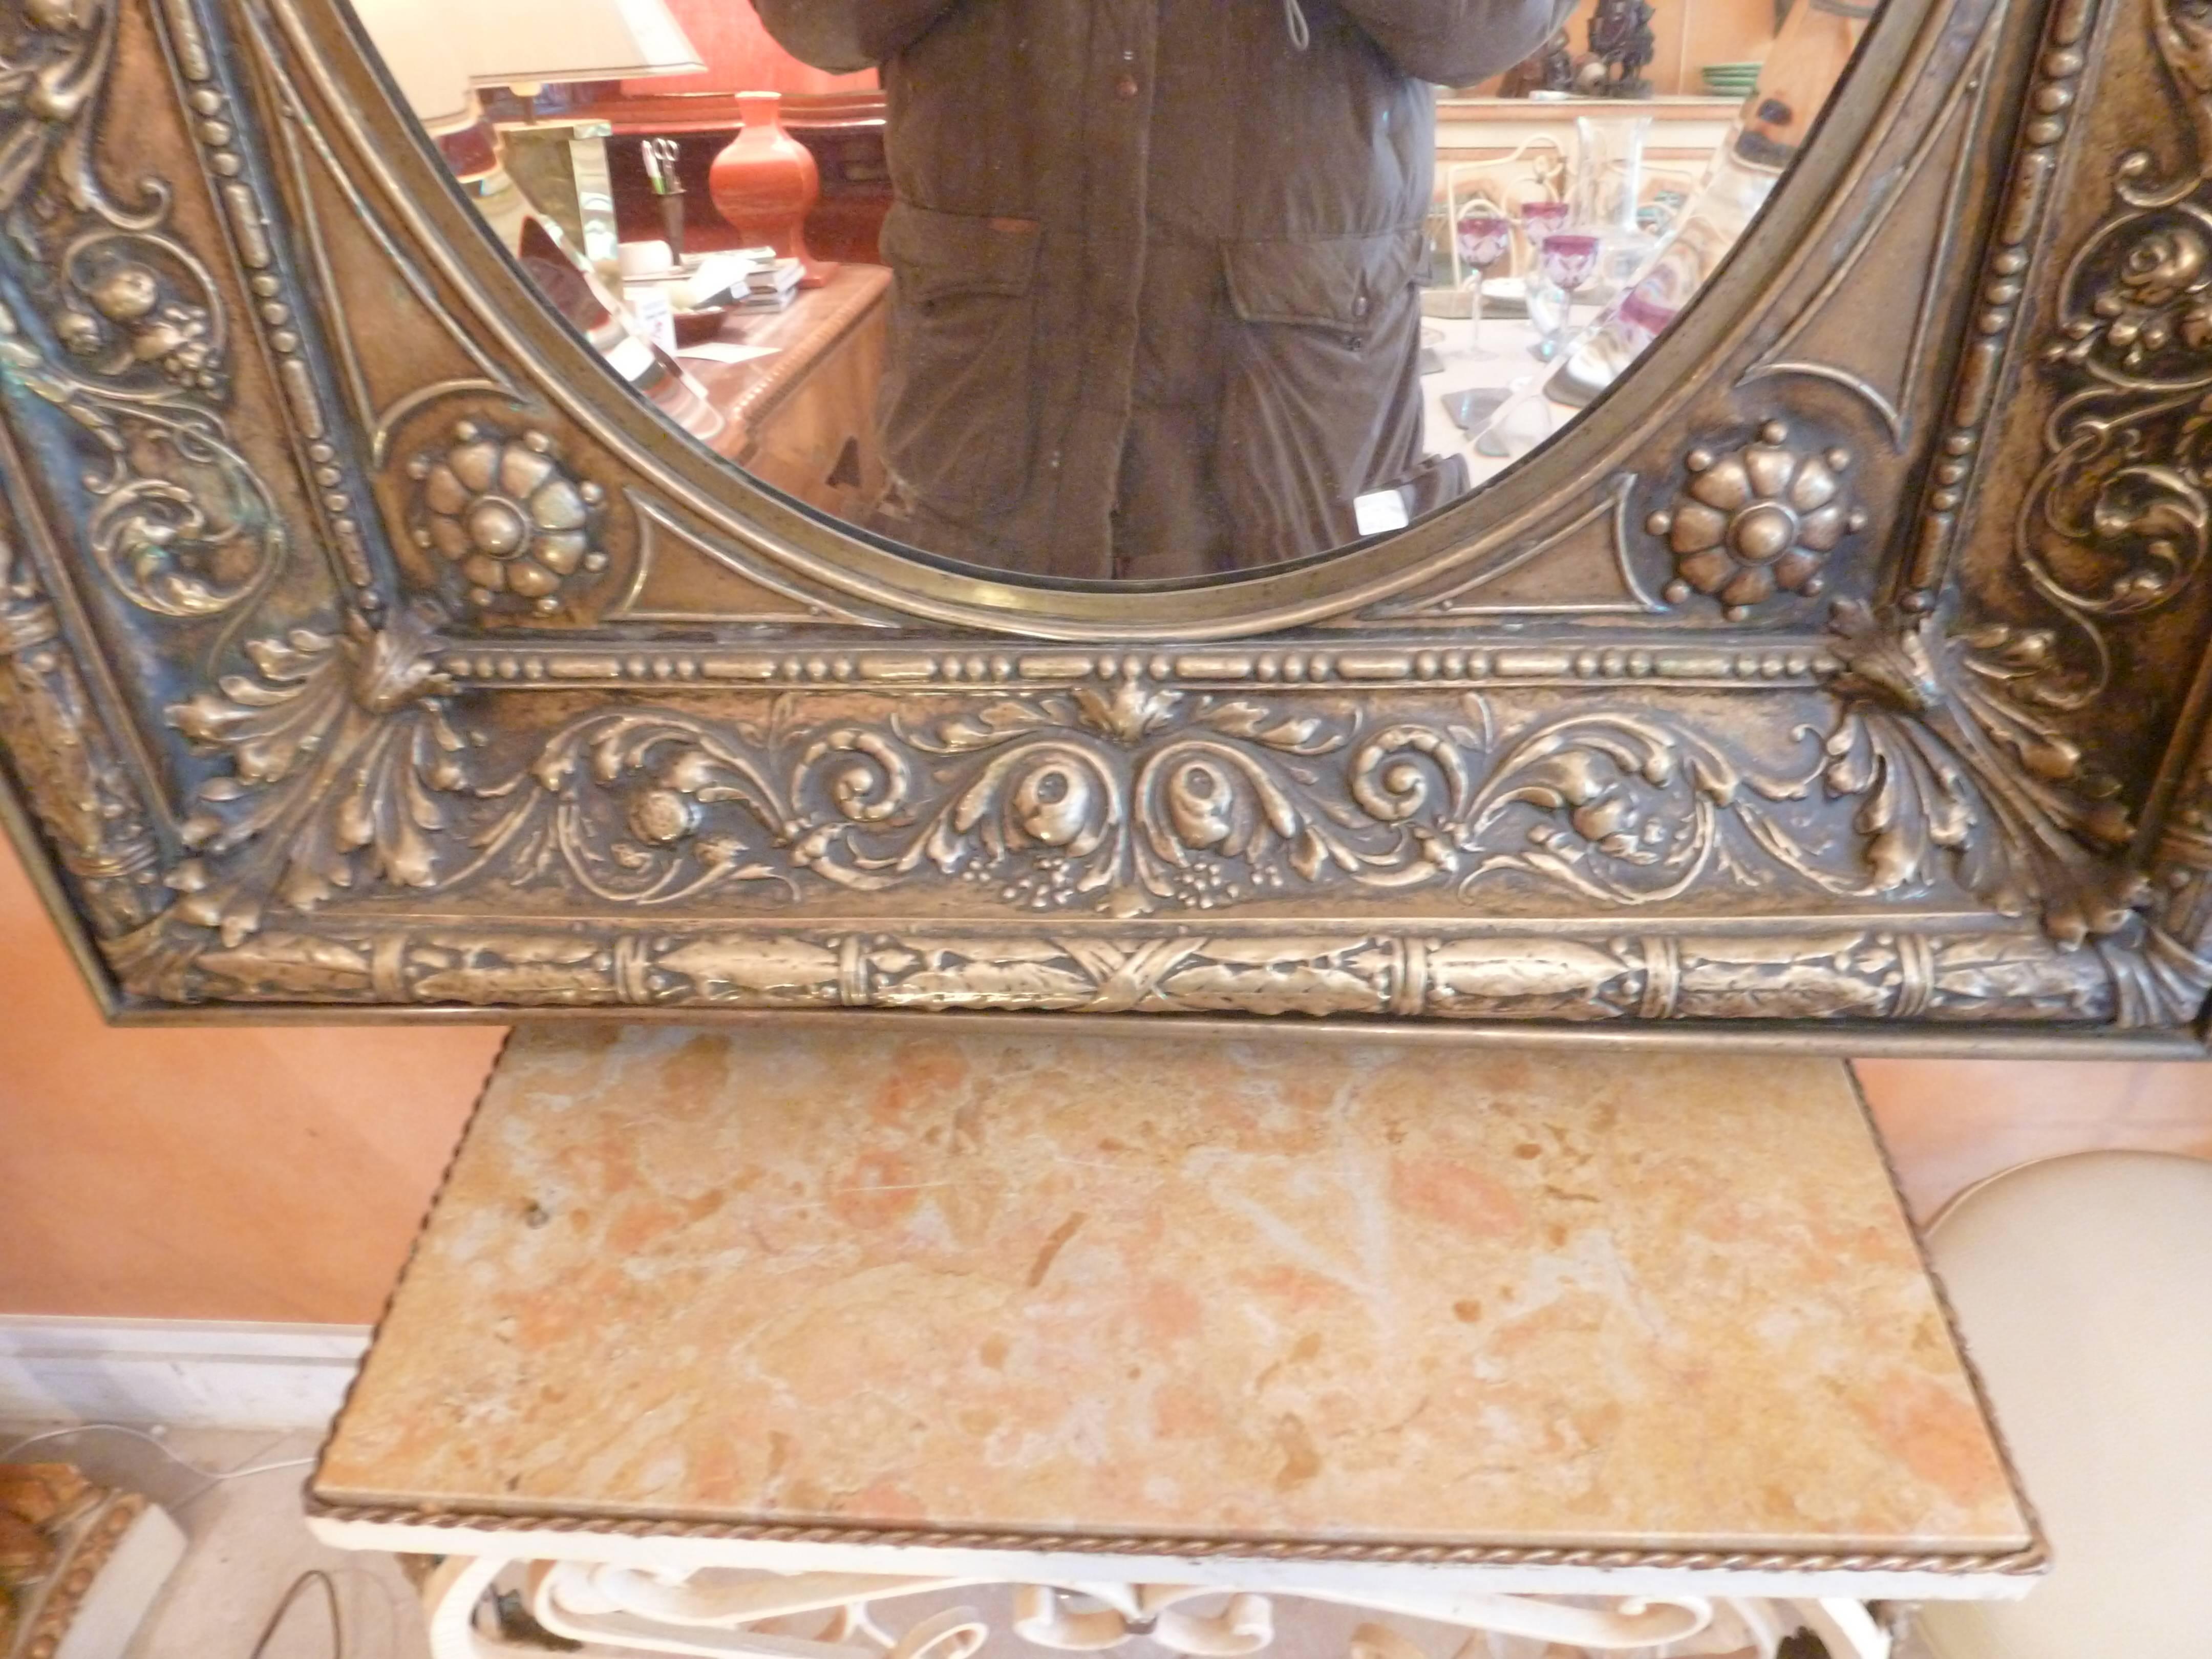 French Provincial Dinandry Metalwork Brass Frame Mirror, 19th Century For Sale